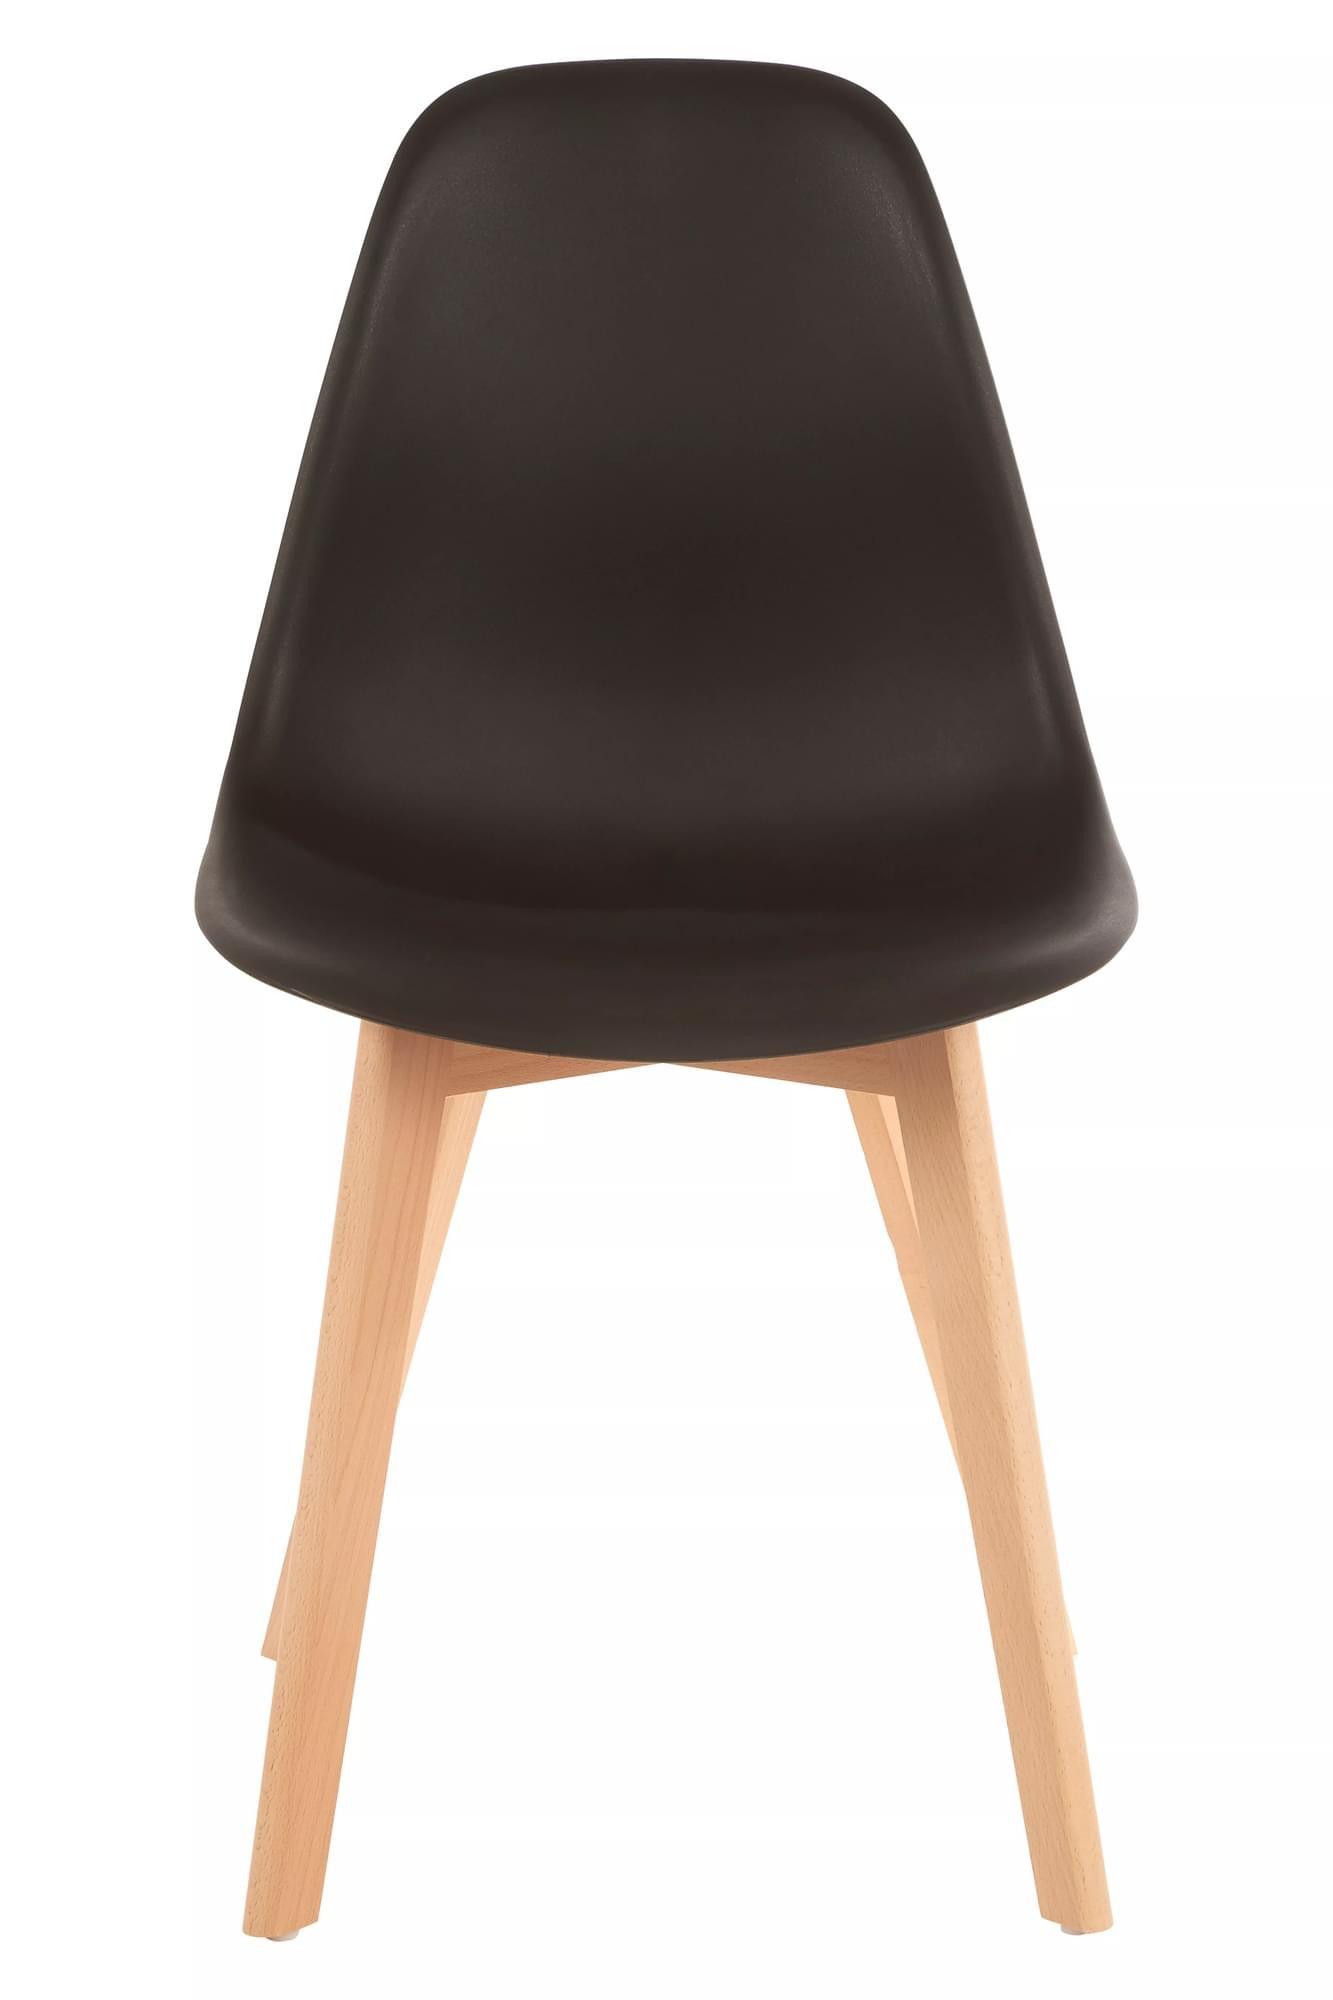 Interiors by Premier Stockholm Black Chair With Beech Wood Legs